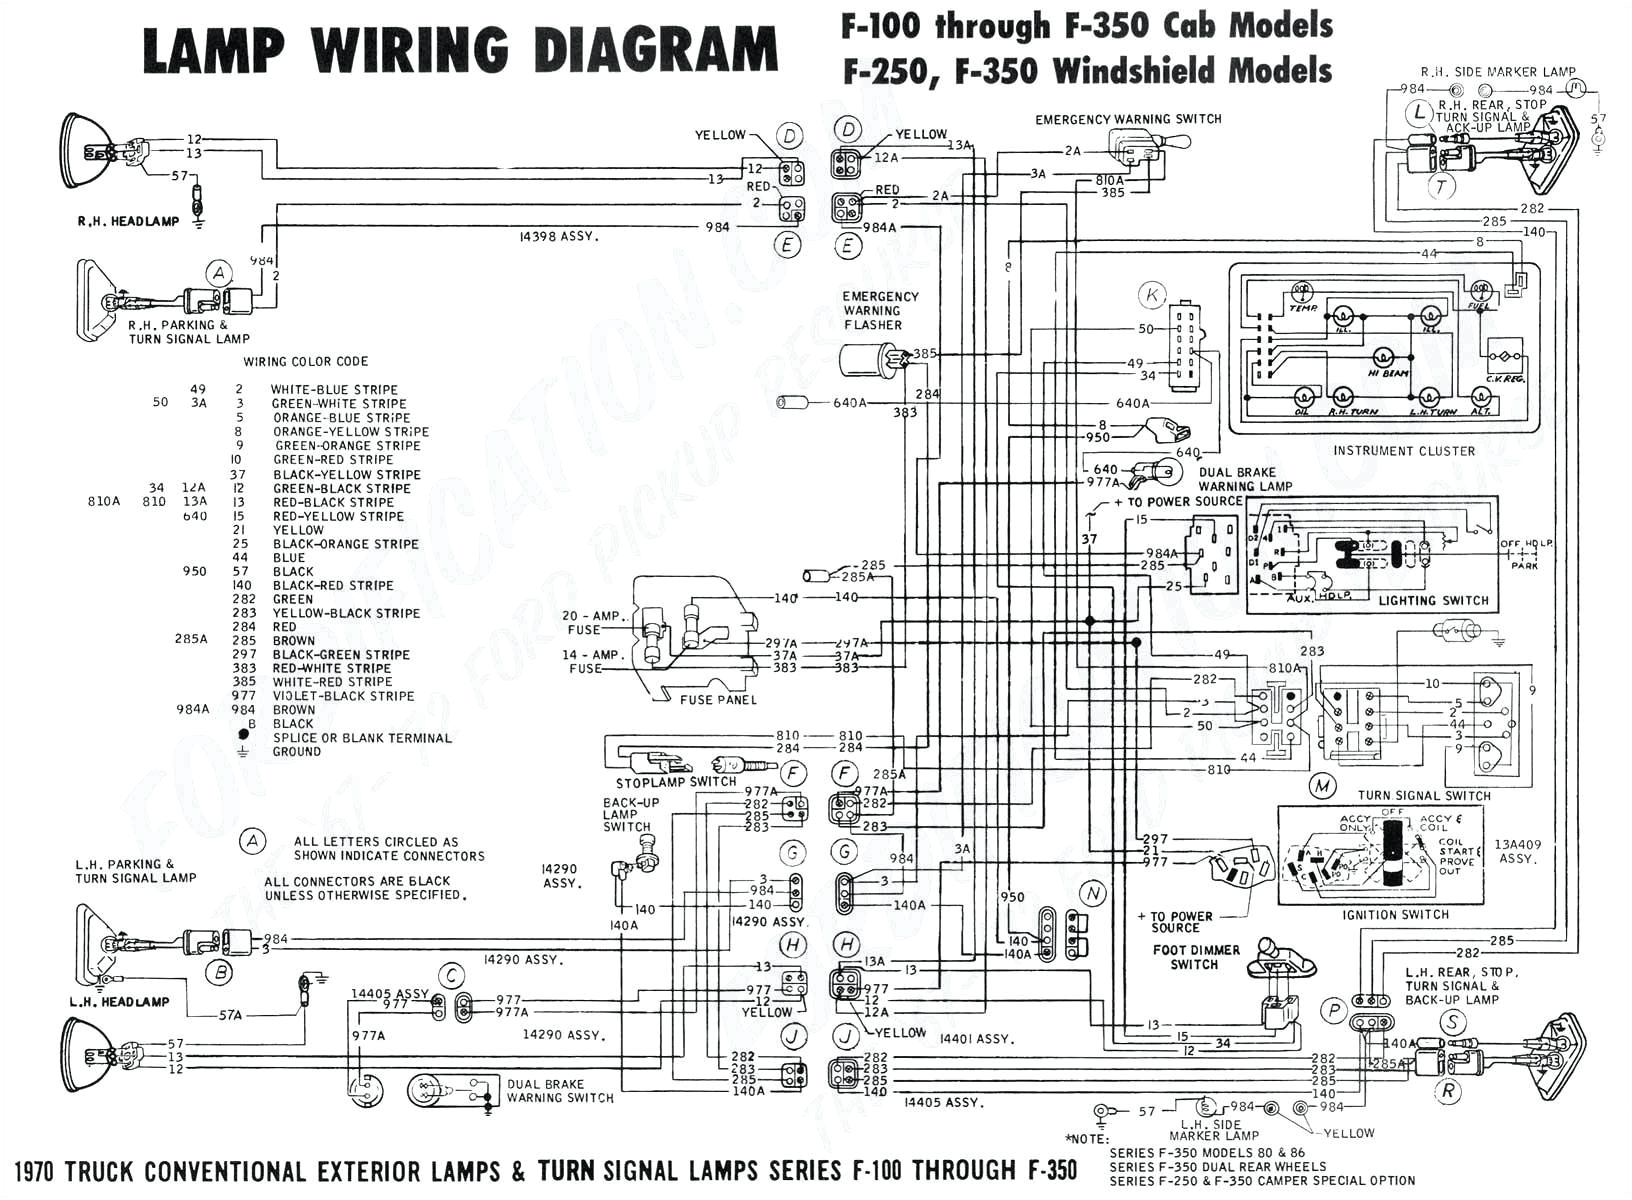 2006 nissan altima fuse relay diagram here39s a diagram of the ipdm 2006 nissan altima fuse relay diagram here39s a diagram of the ipdm